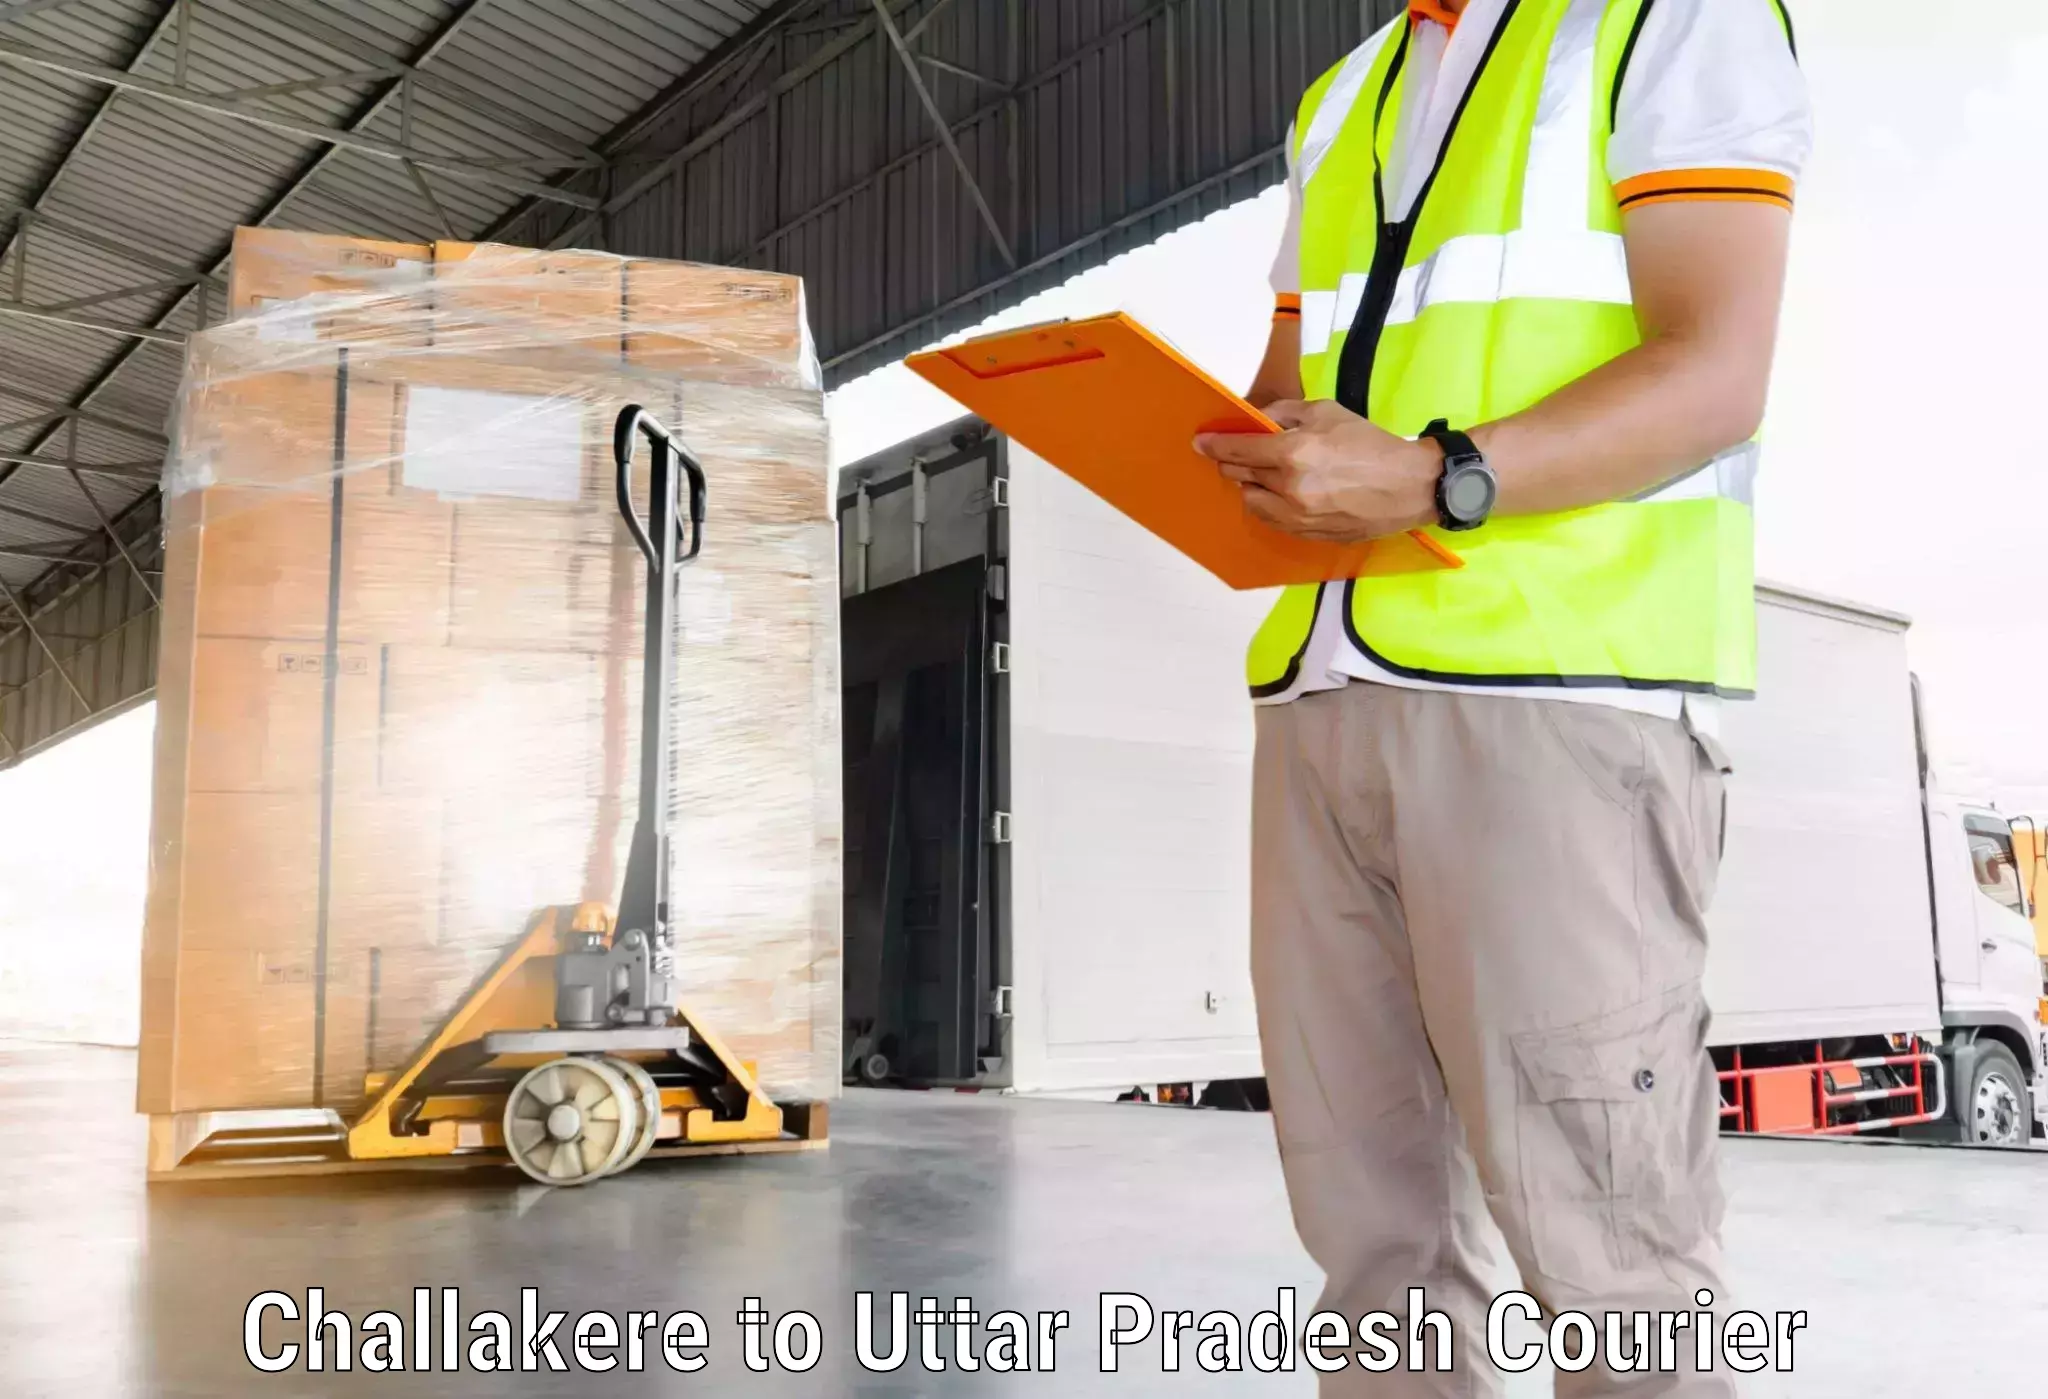 Online shipping calculator Challakere to Anupshahar